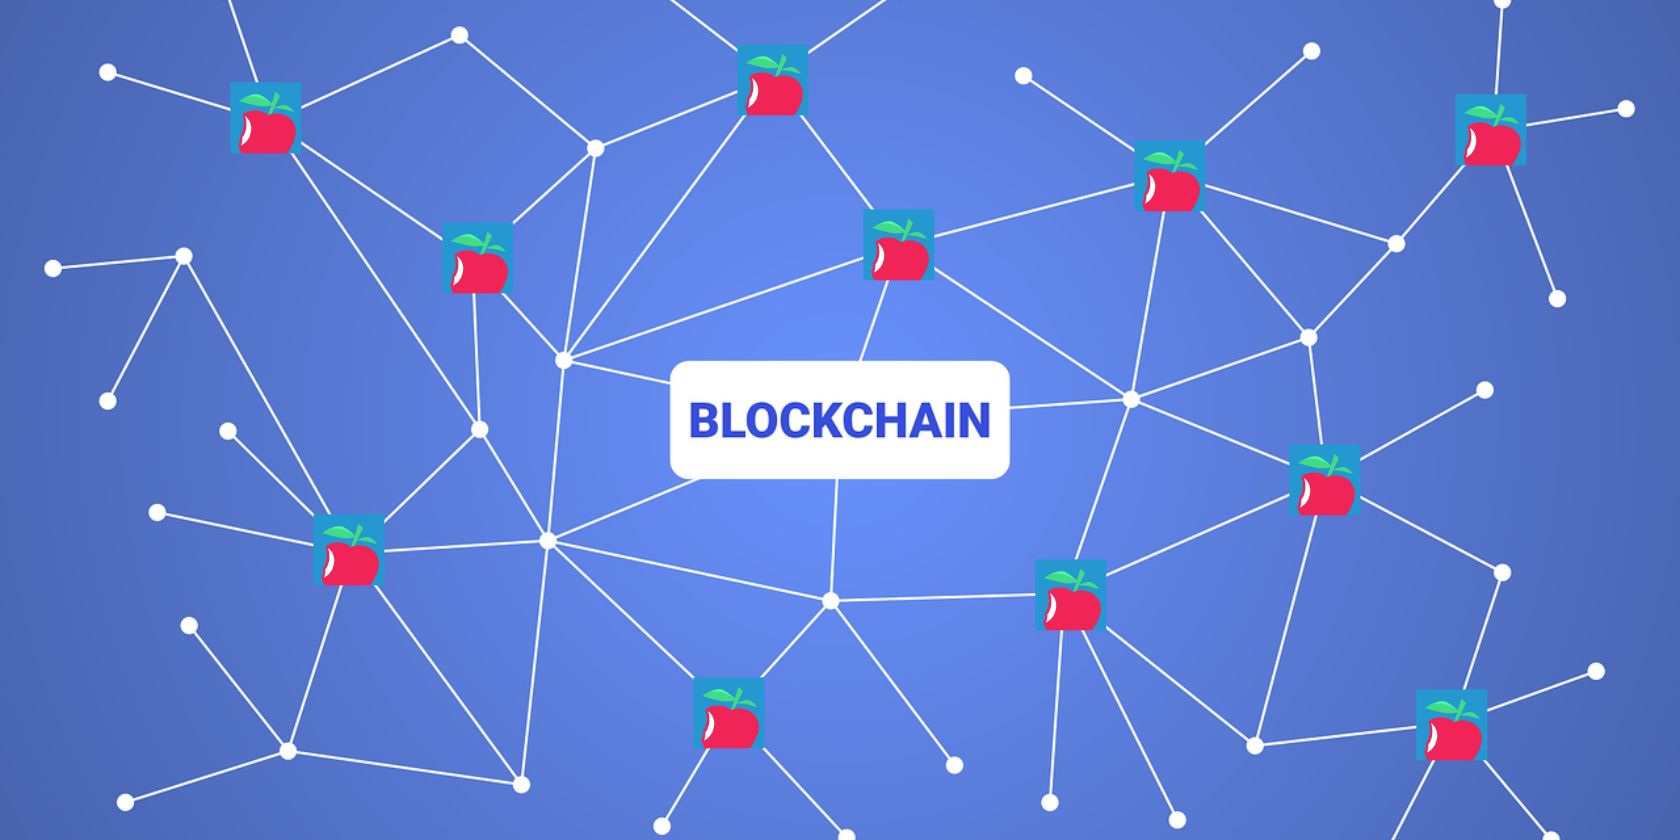 A graphic representing the blockchain using the Apple Daily logo as blocks.